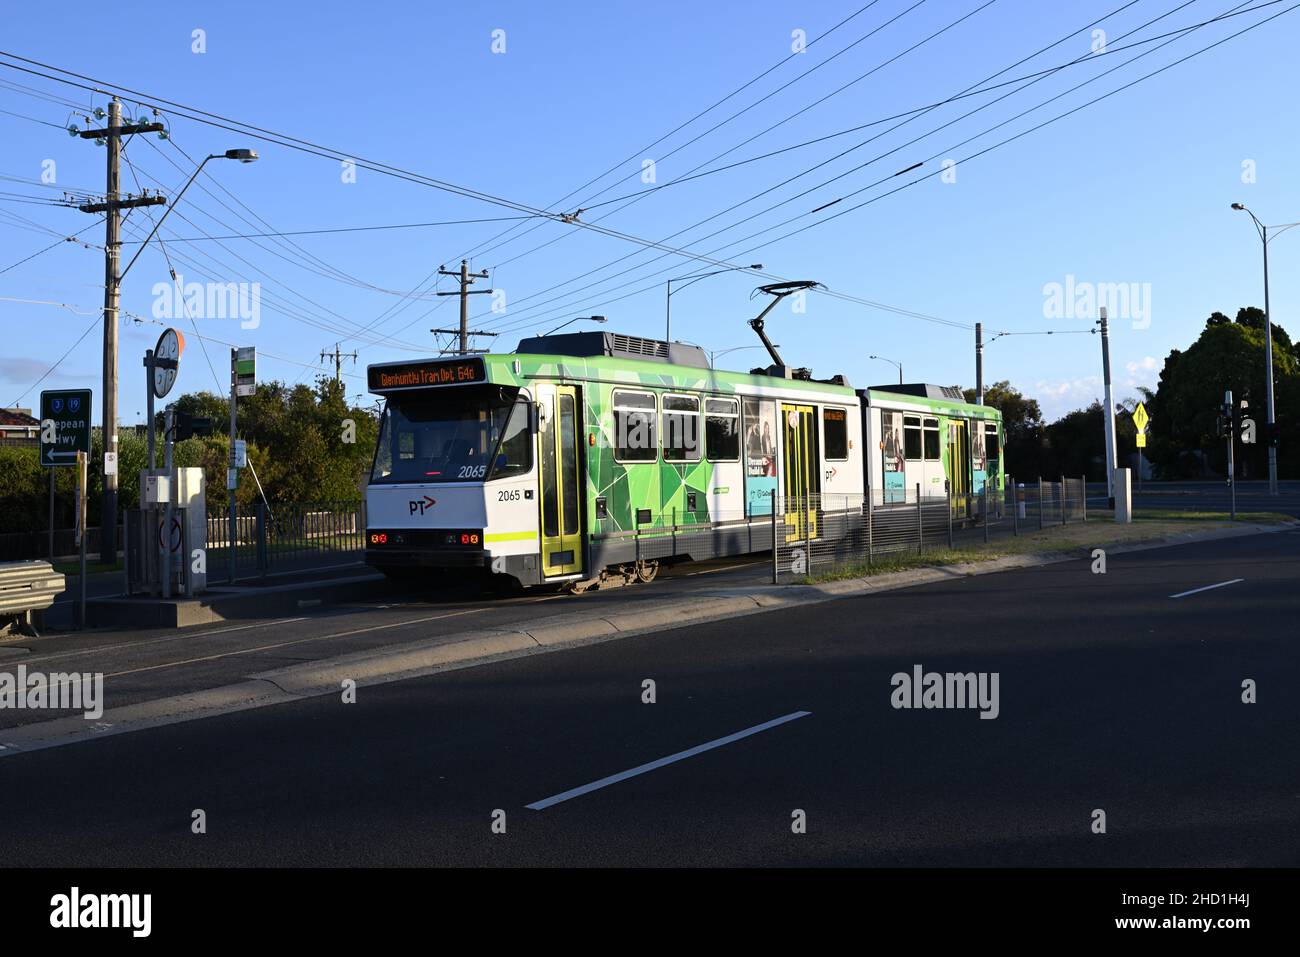 B-Class tram with PTV livery stopped at the end of route 64, near Nepean Hwy, around sunset on a clear day Stock Photo